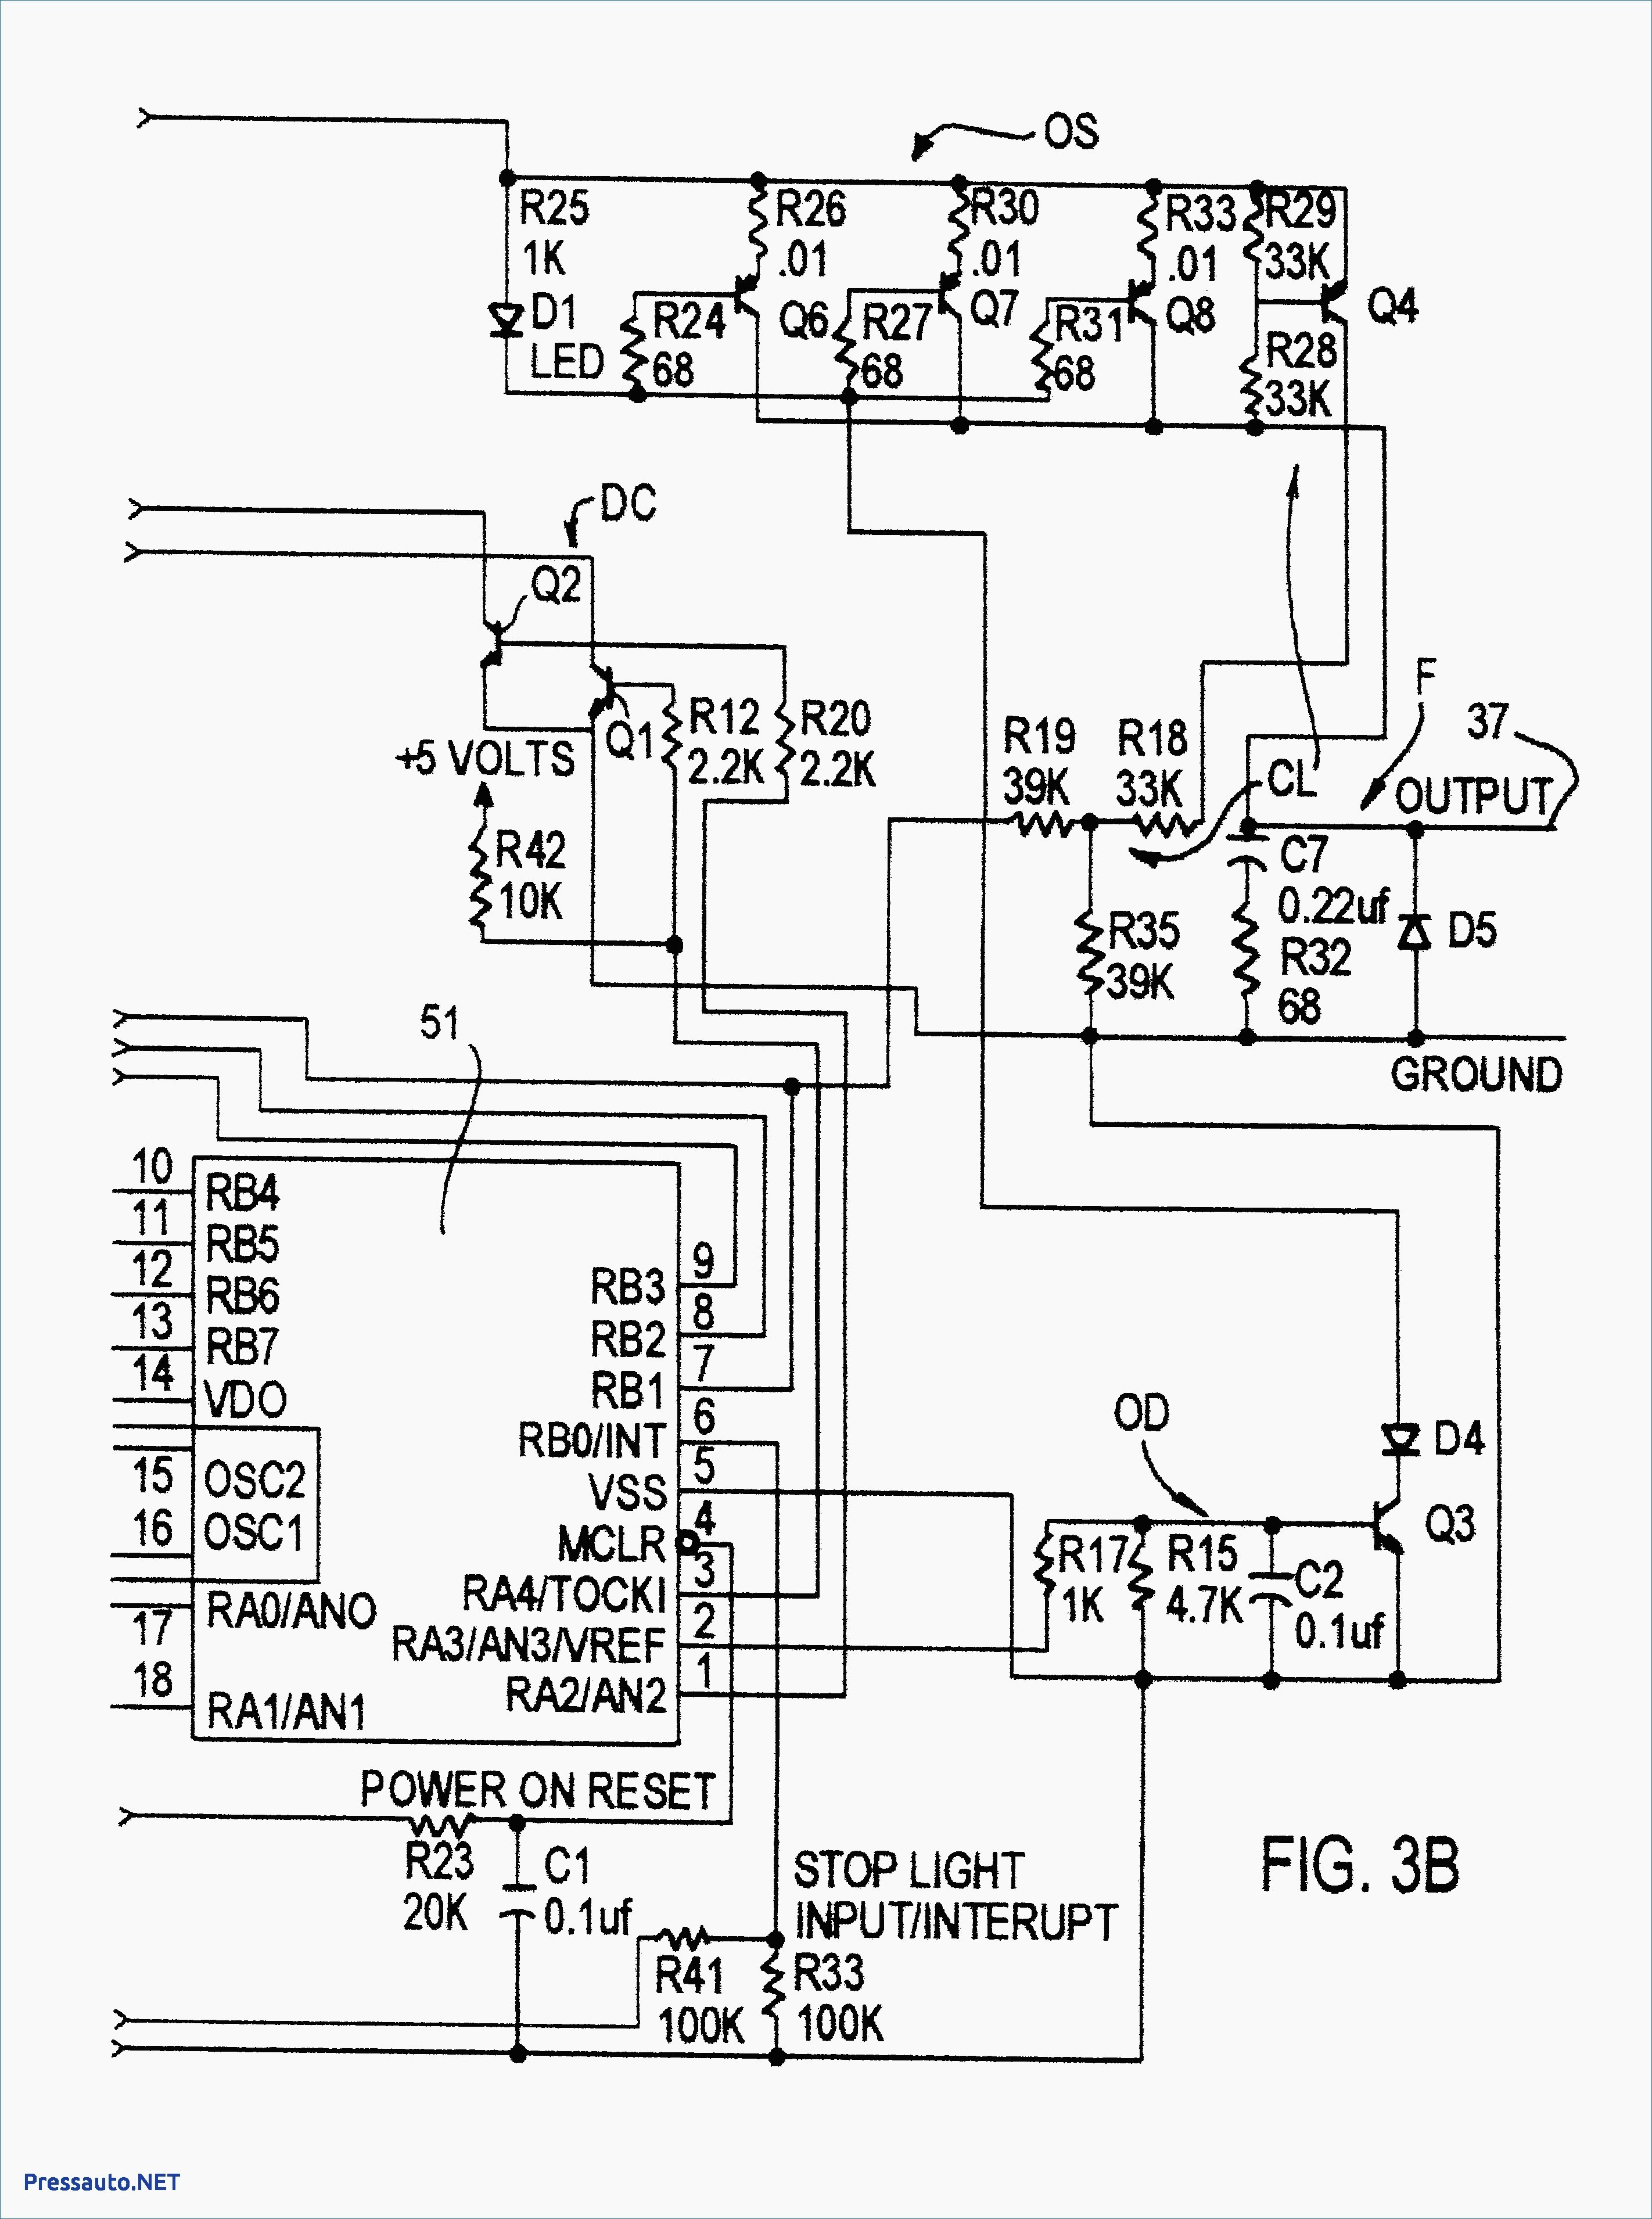 Lx885 Wiring Diagram Diagrams Instructions Start Stop Wiring Diagram Auto Diagrams Instructions Wiring